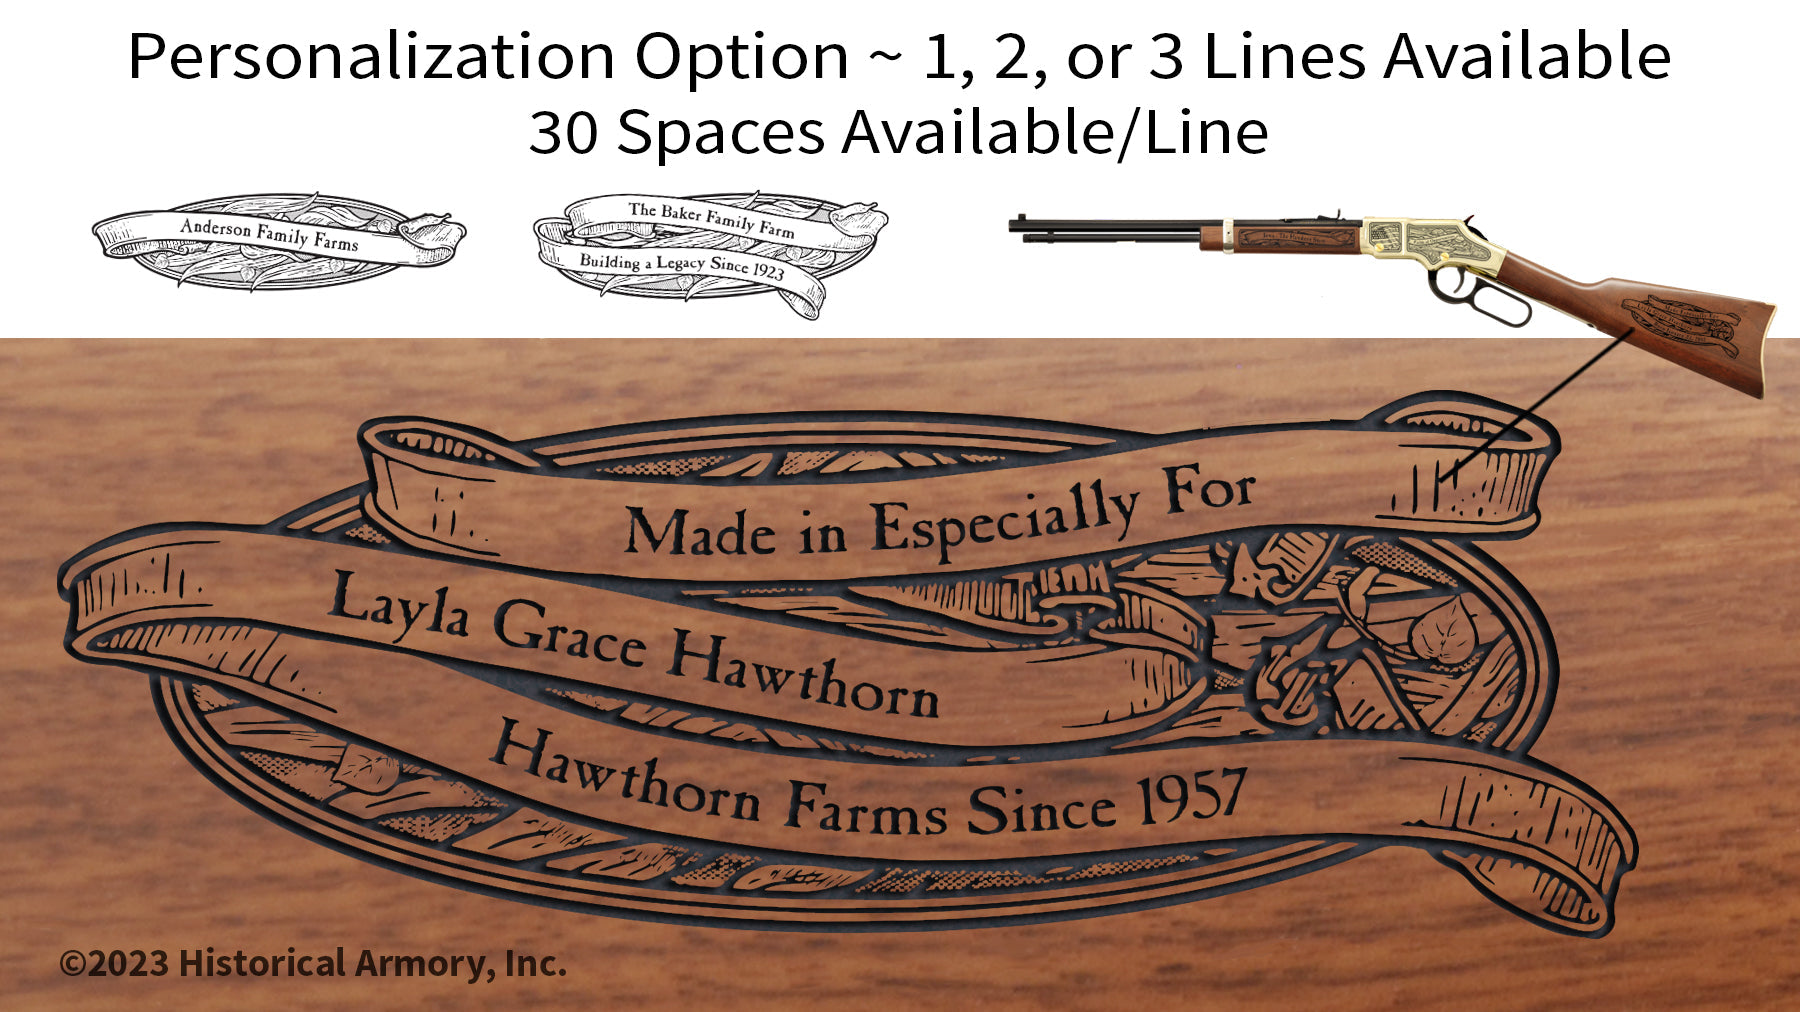 Texas Agricultural Heritage Engraved Rifle Personalization